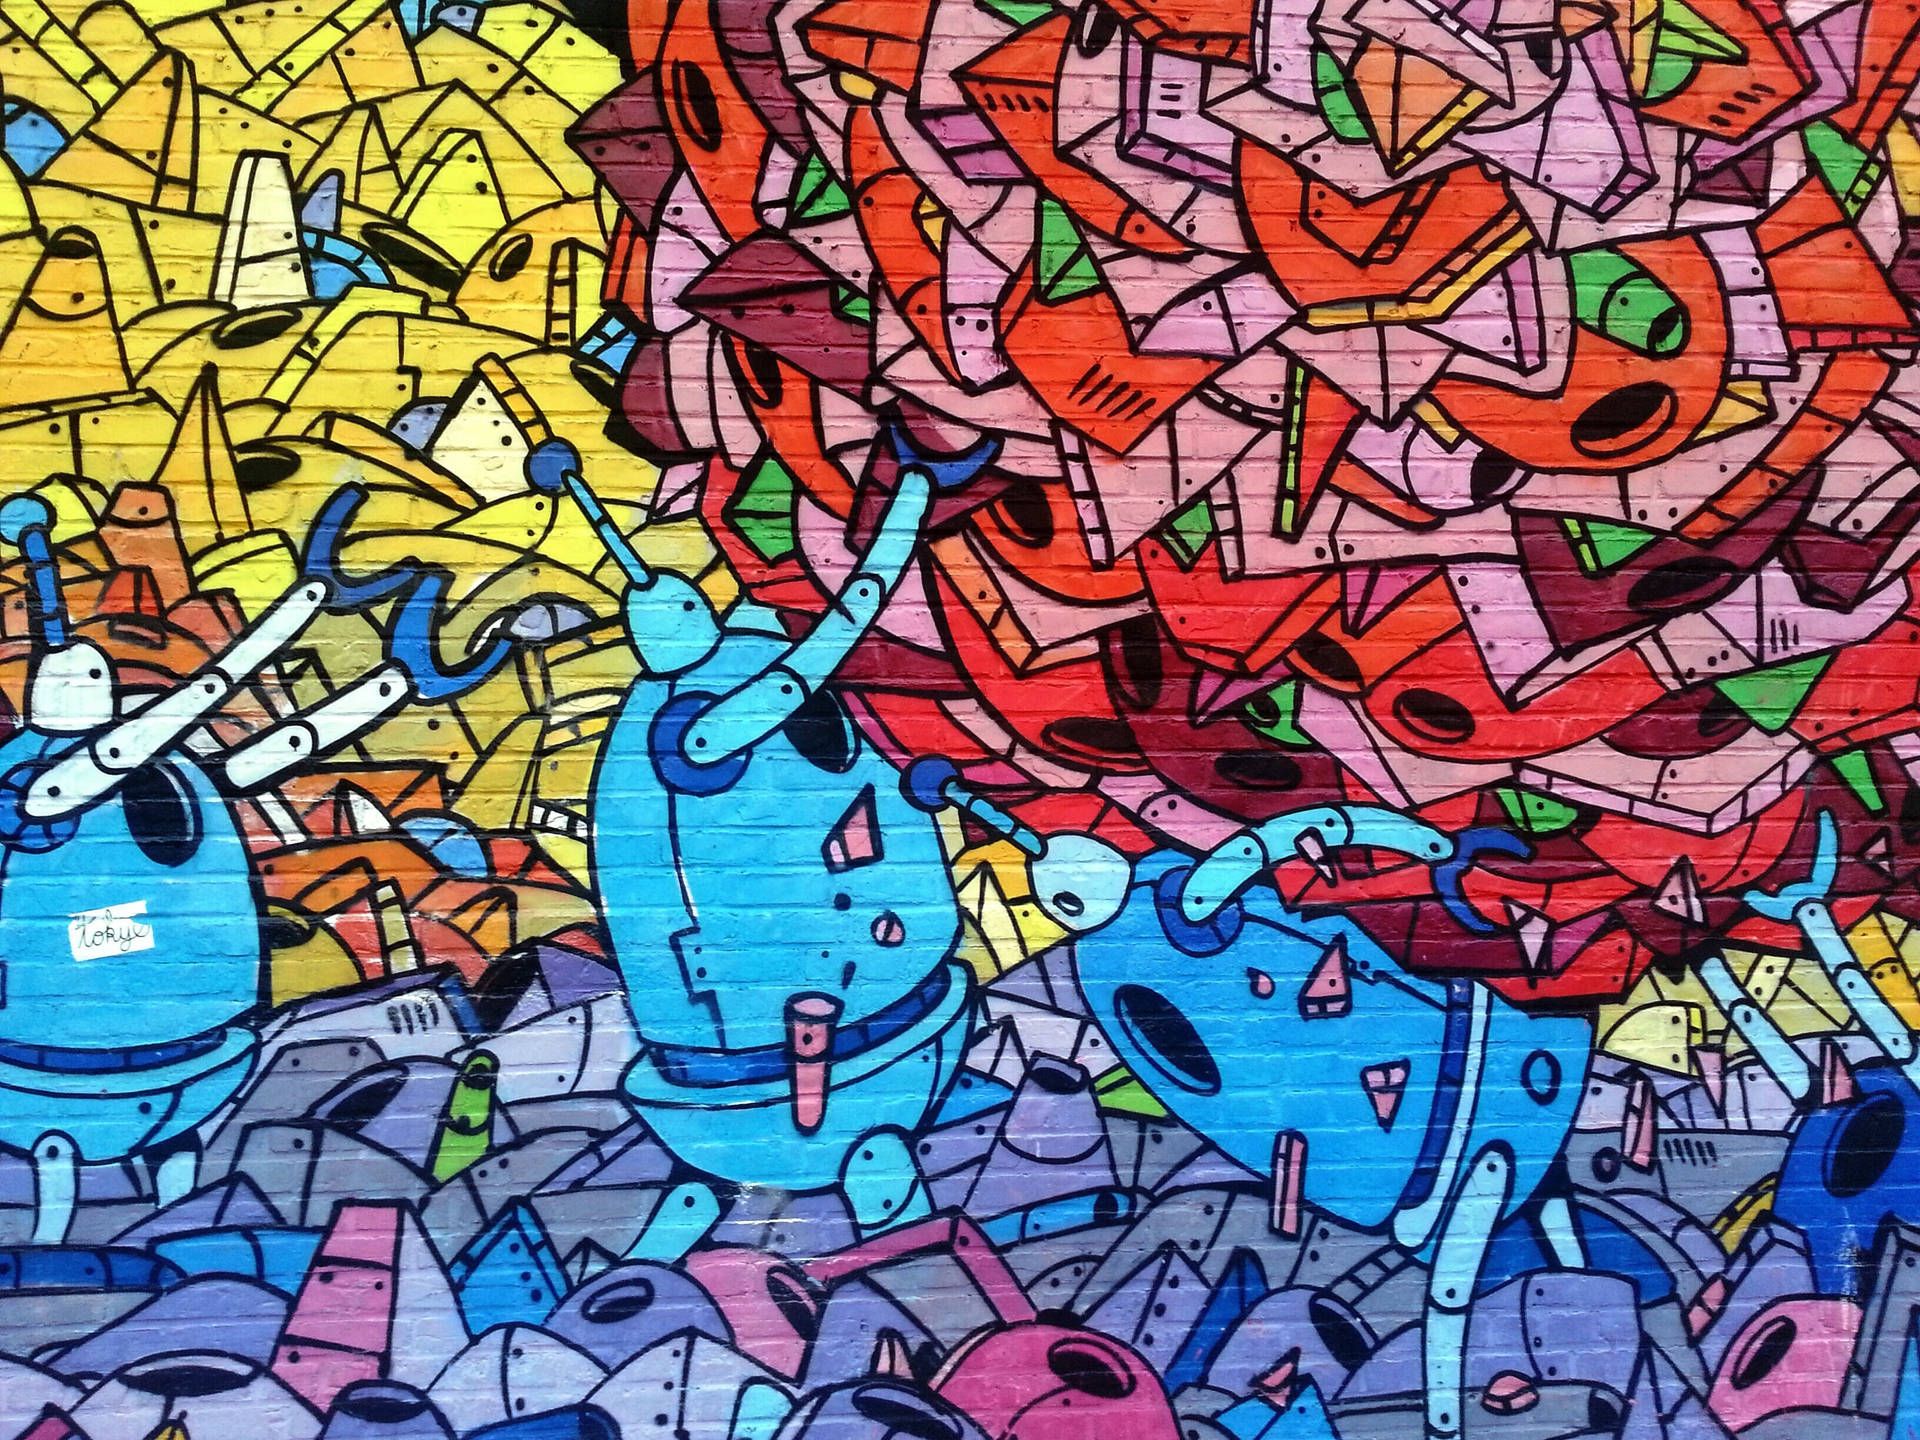 A colorful mural of robots and other objects - Graffiti